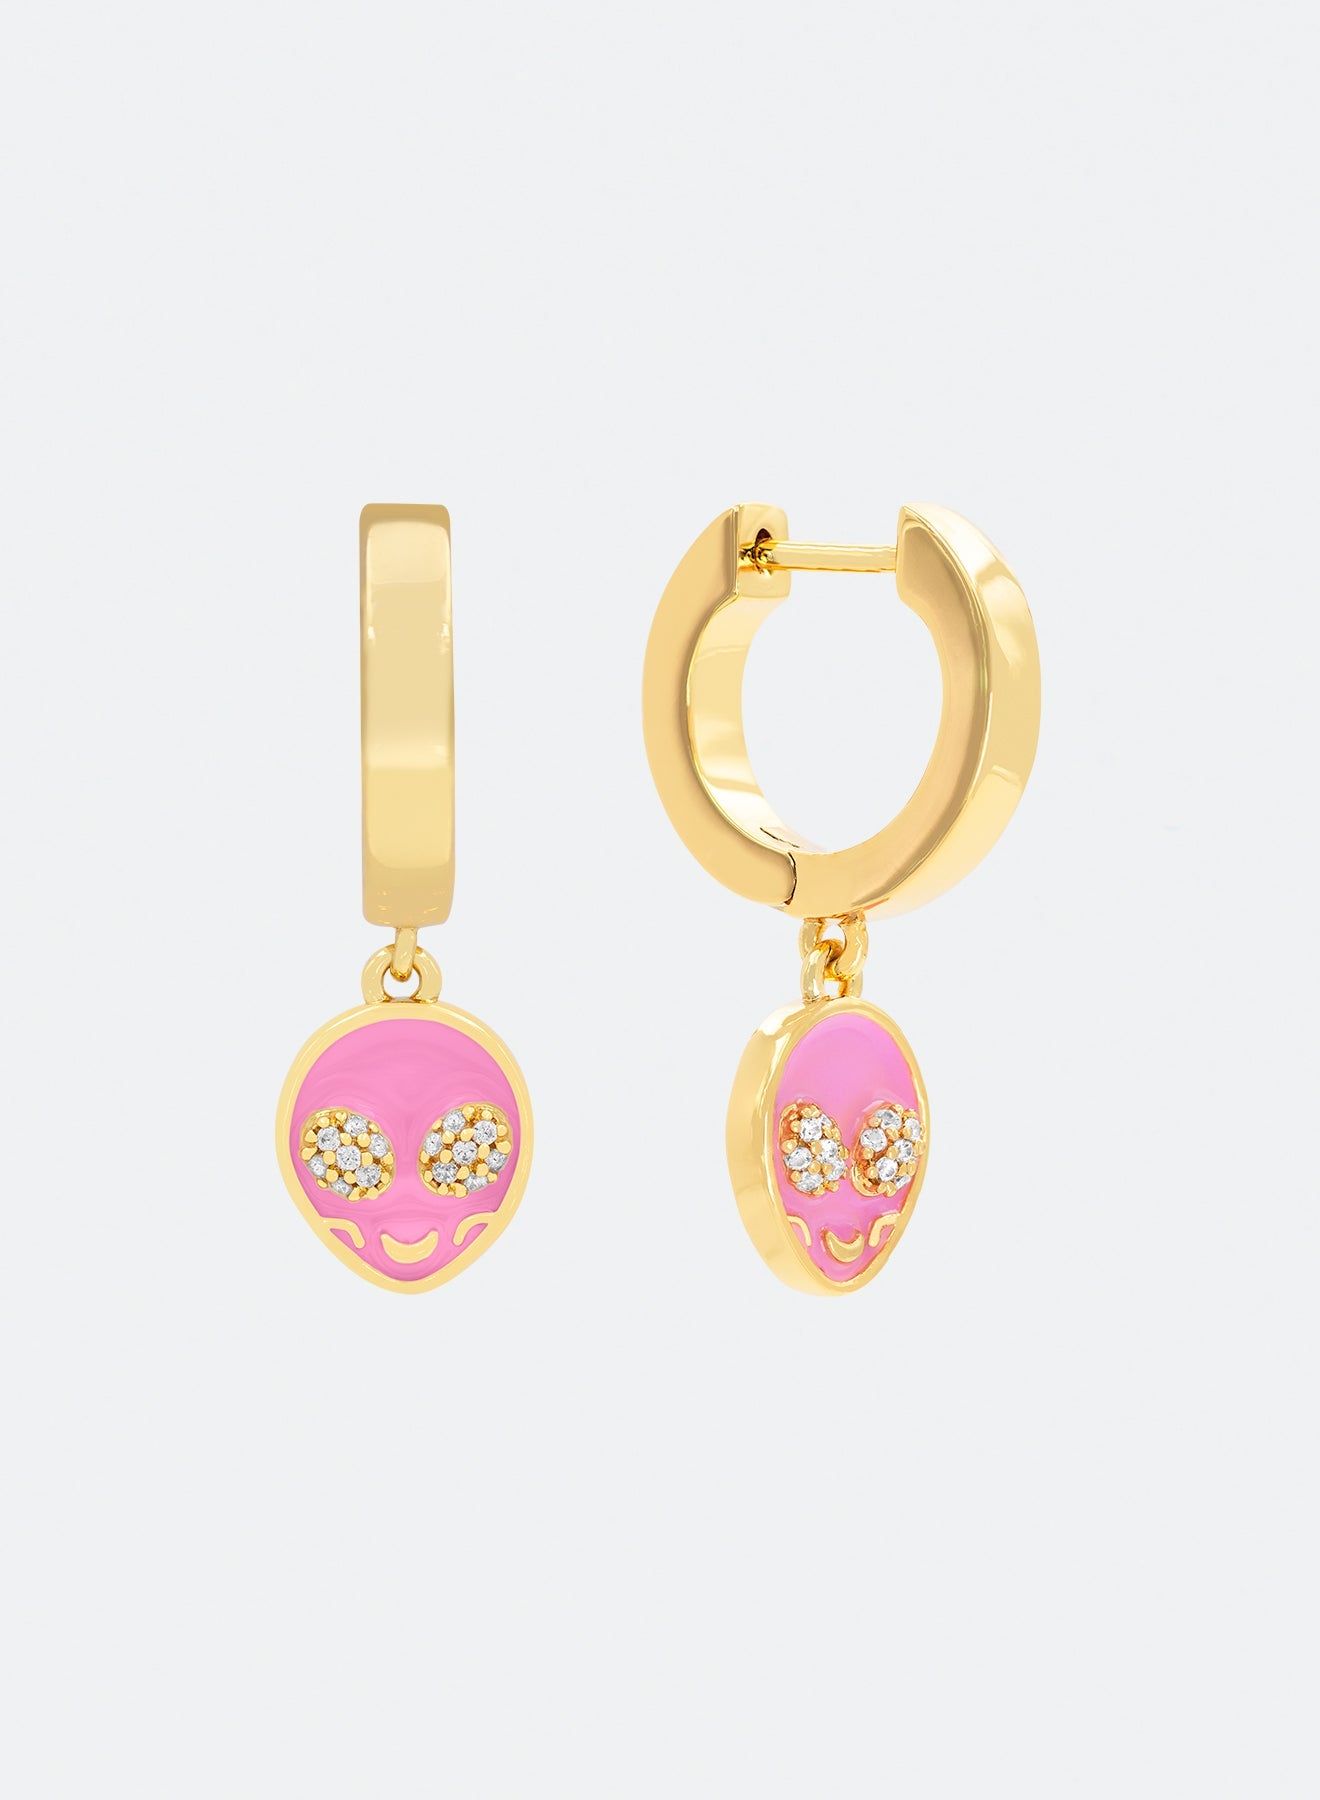 18k yellow gold coated alien earrings with hand-set micropavé stones in white on pink hand painted glow in the dark enamel mini aliens